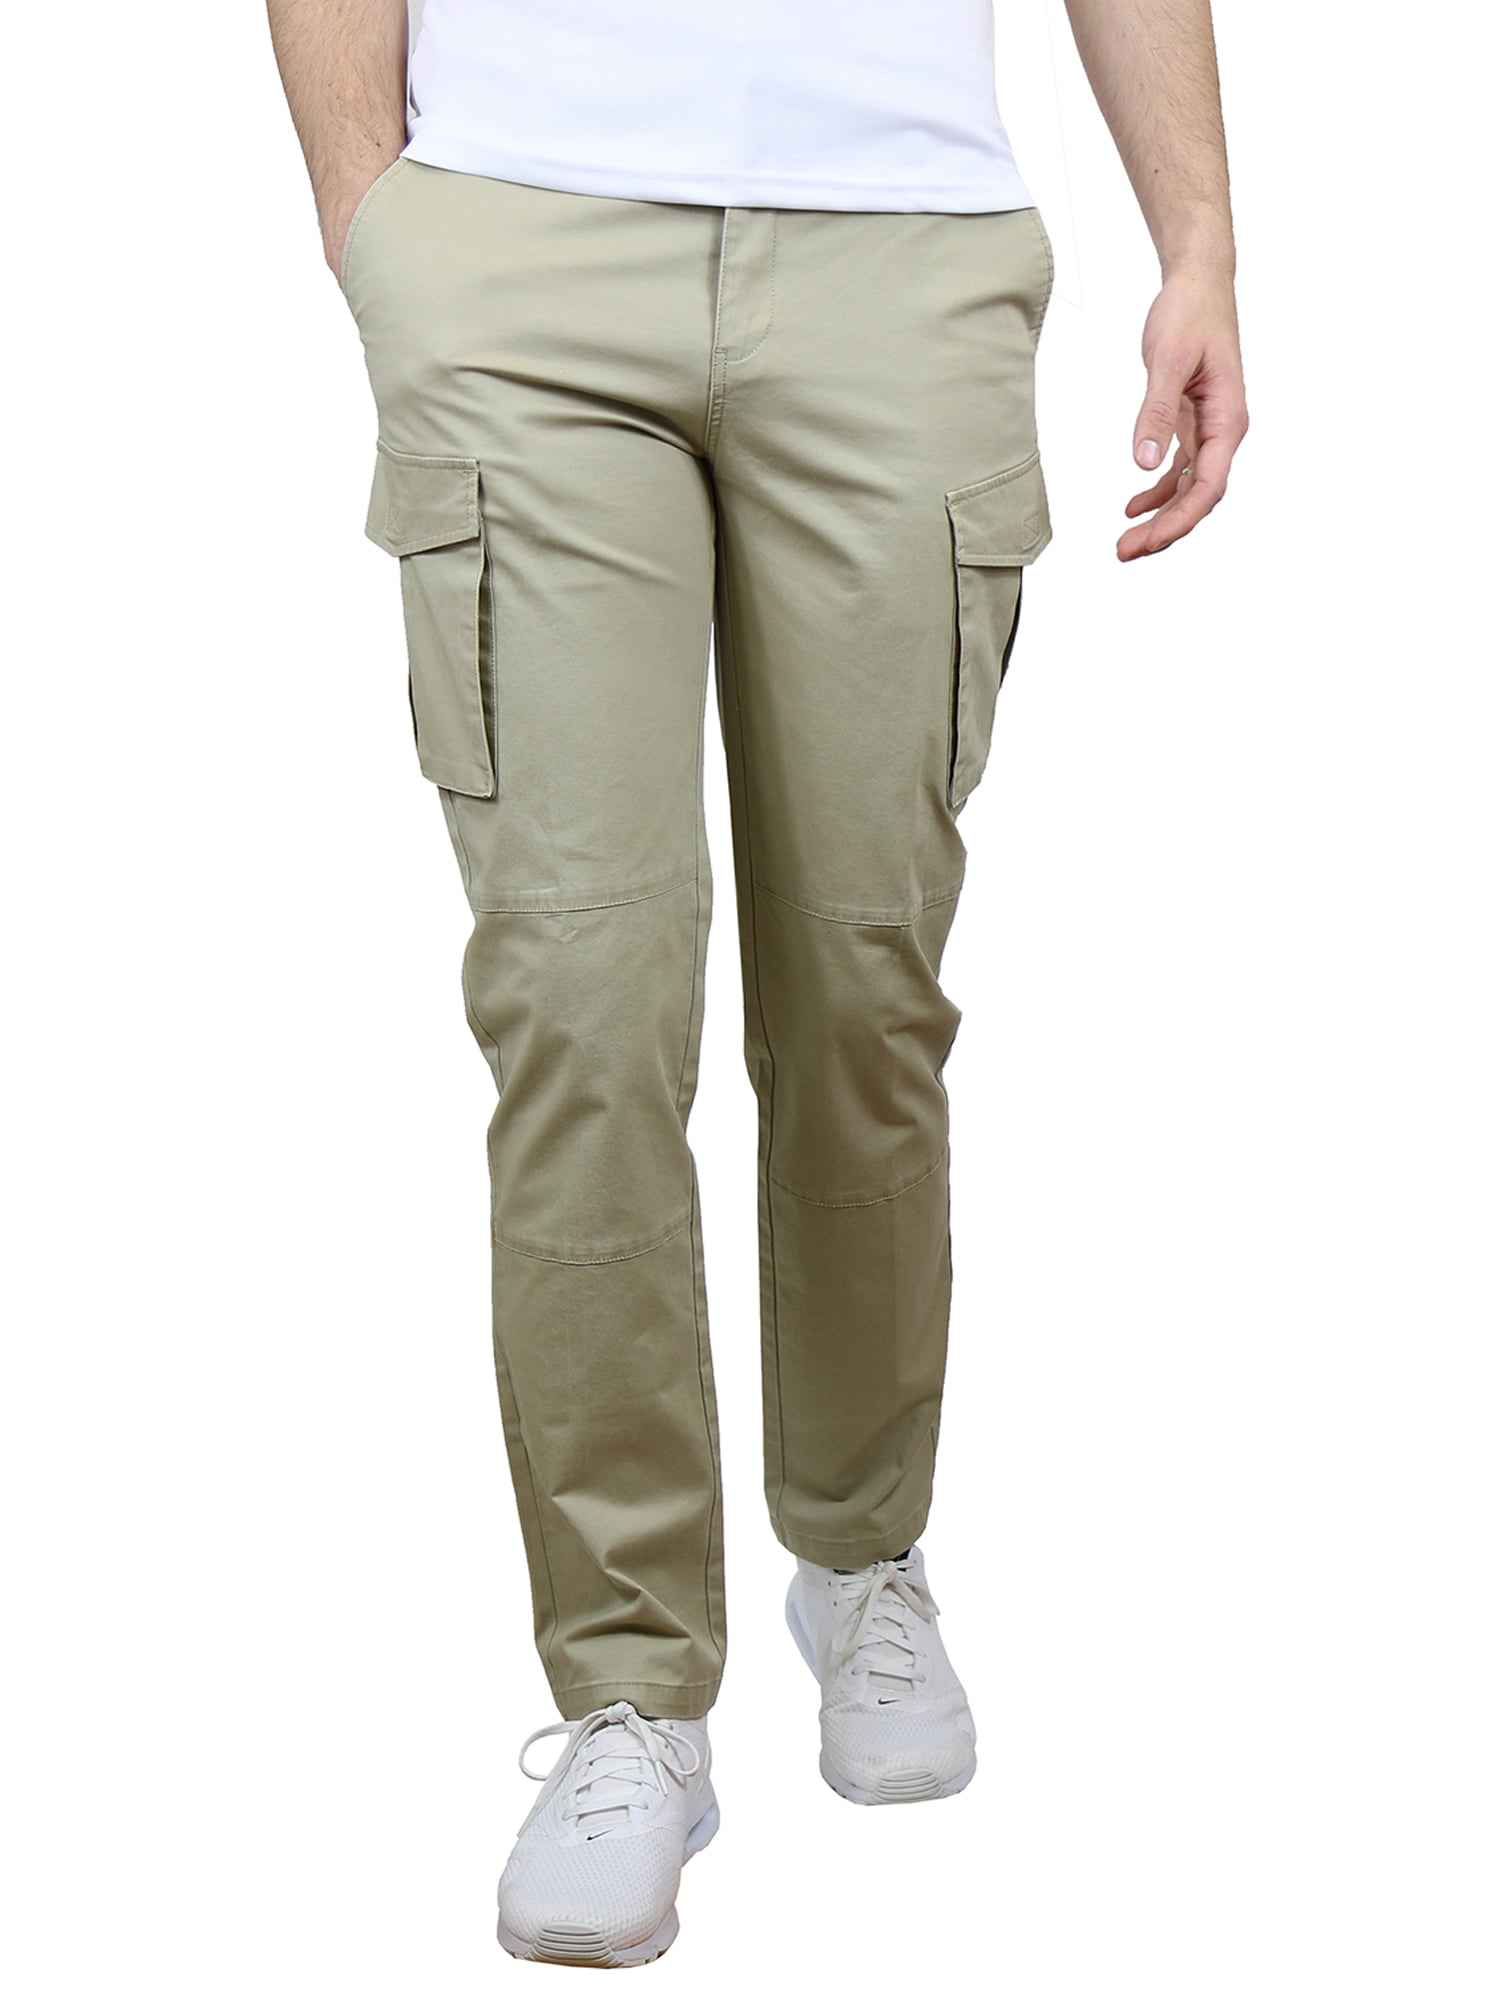 GBH - GBH Men's Slim-Fit Cotton-Stretch Cargo Chino Pants (30-40